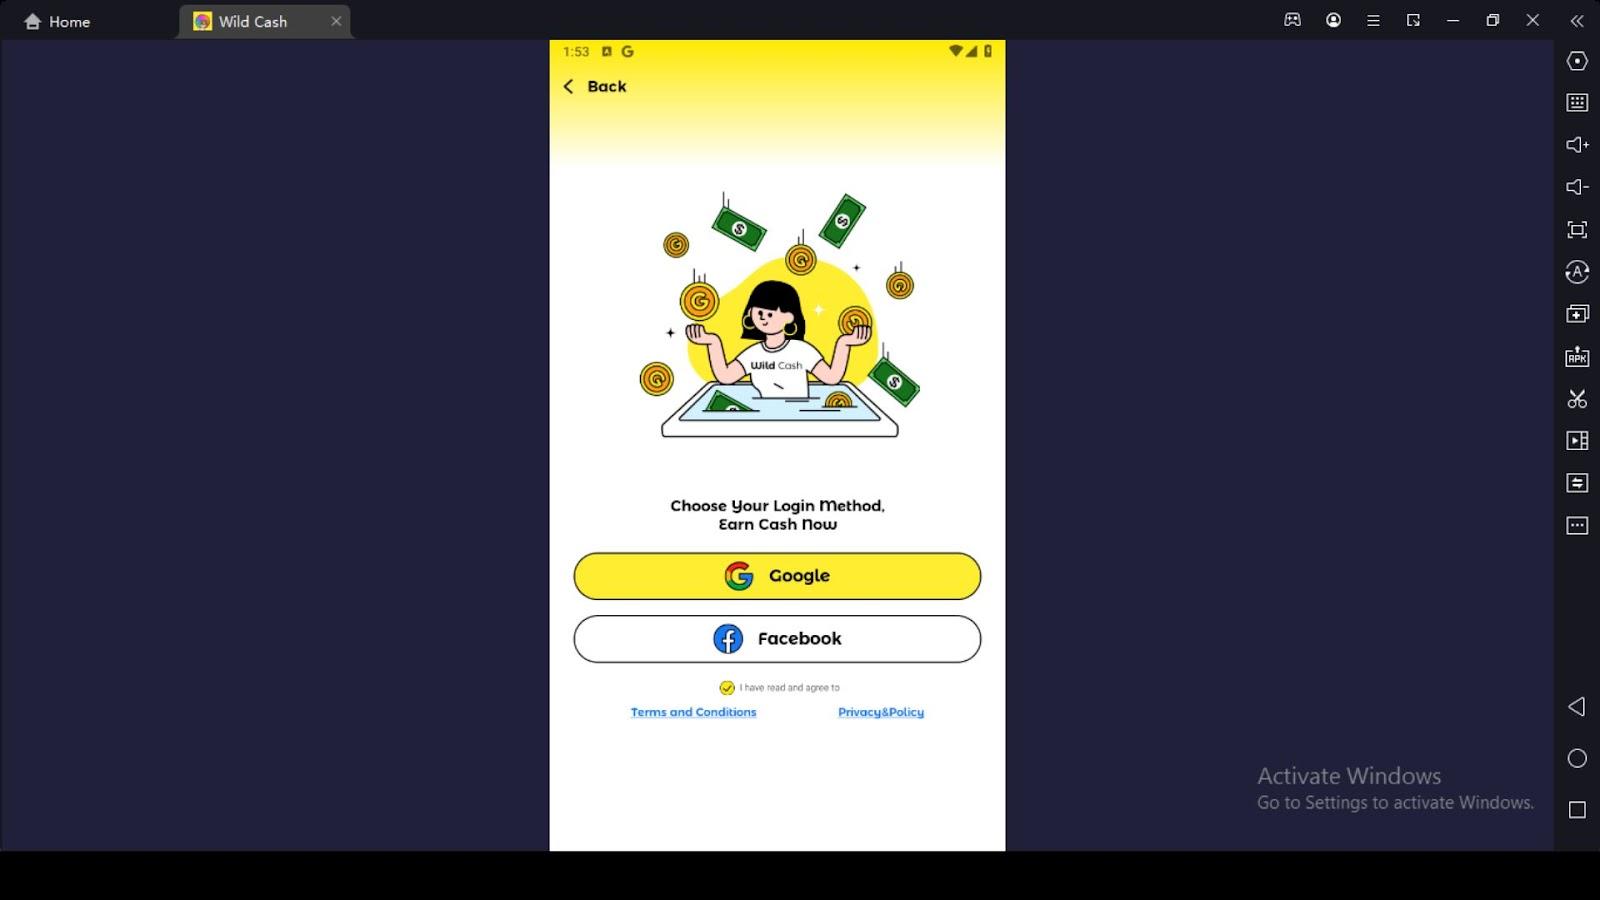 Overview of the Wild Cash App